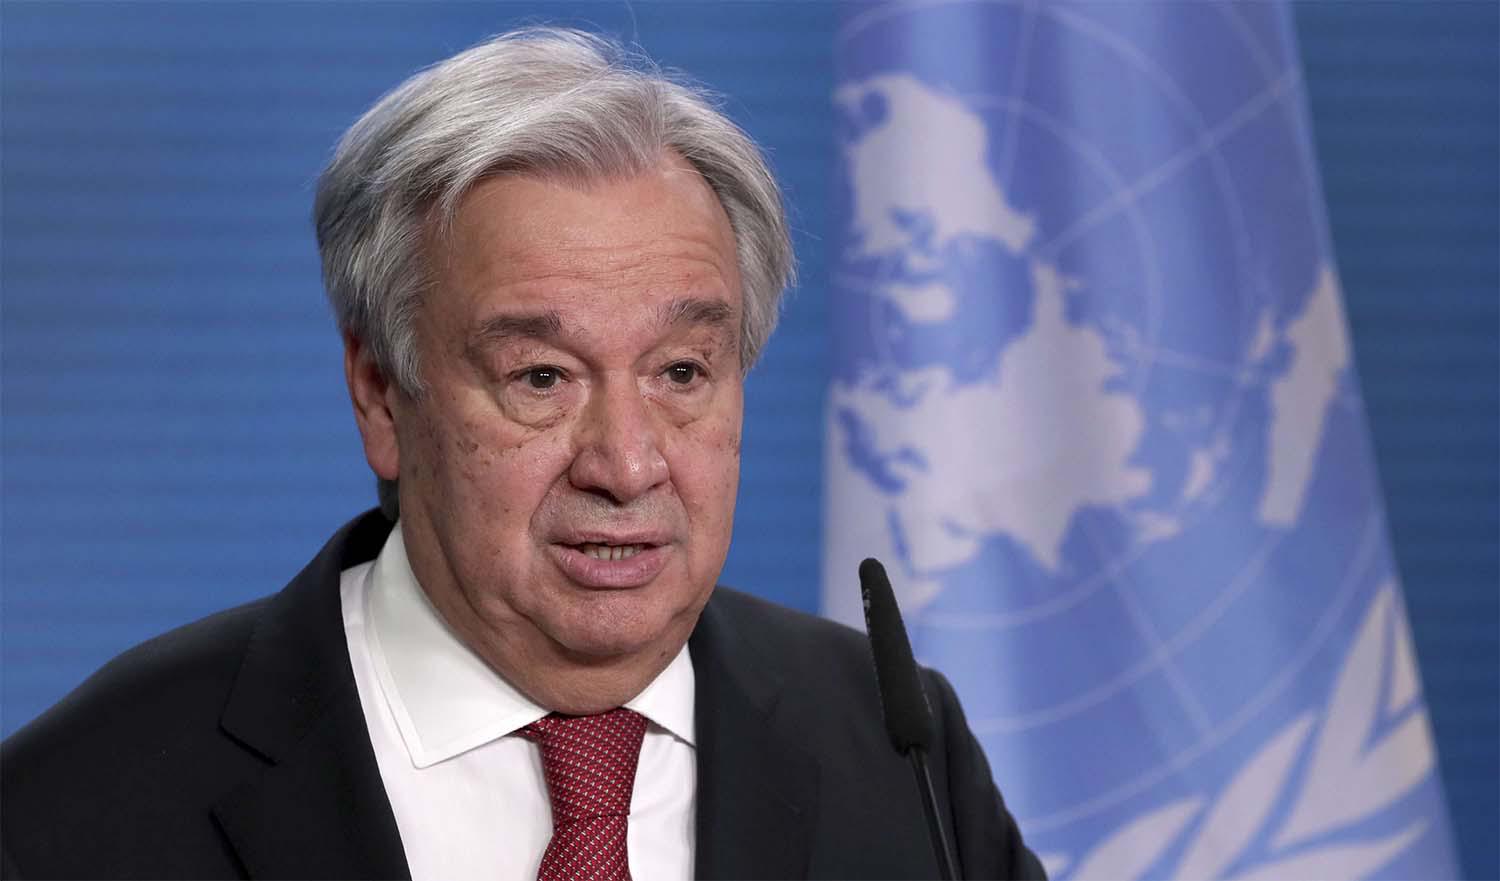 Guterres proposed “an initial maximum number of 60 monitors” for “a phased deployment” of the ceasefire monitoring component 